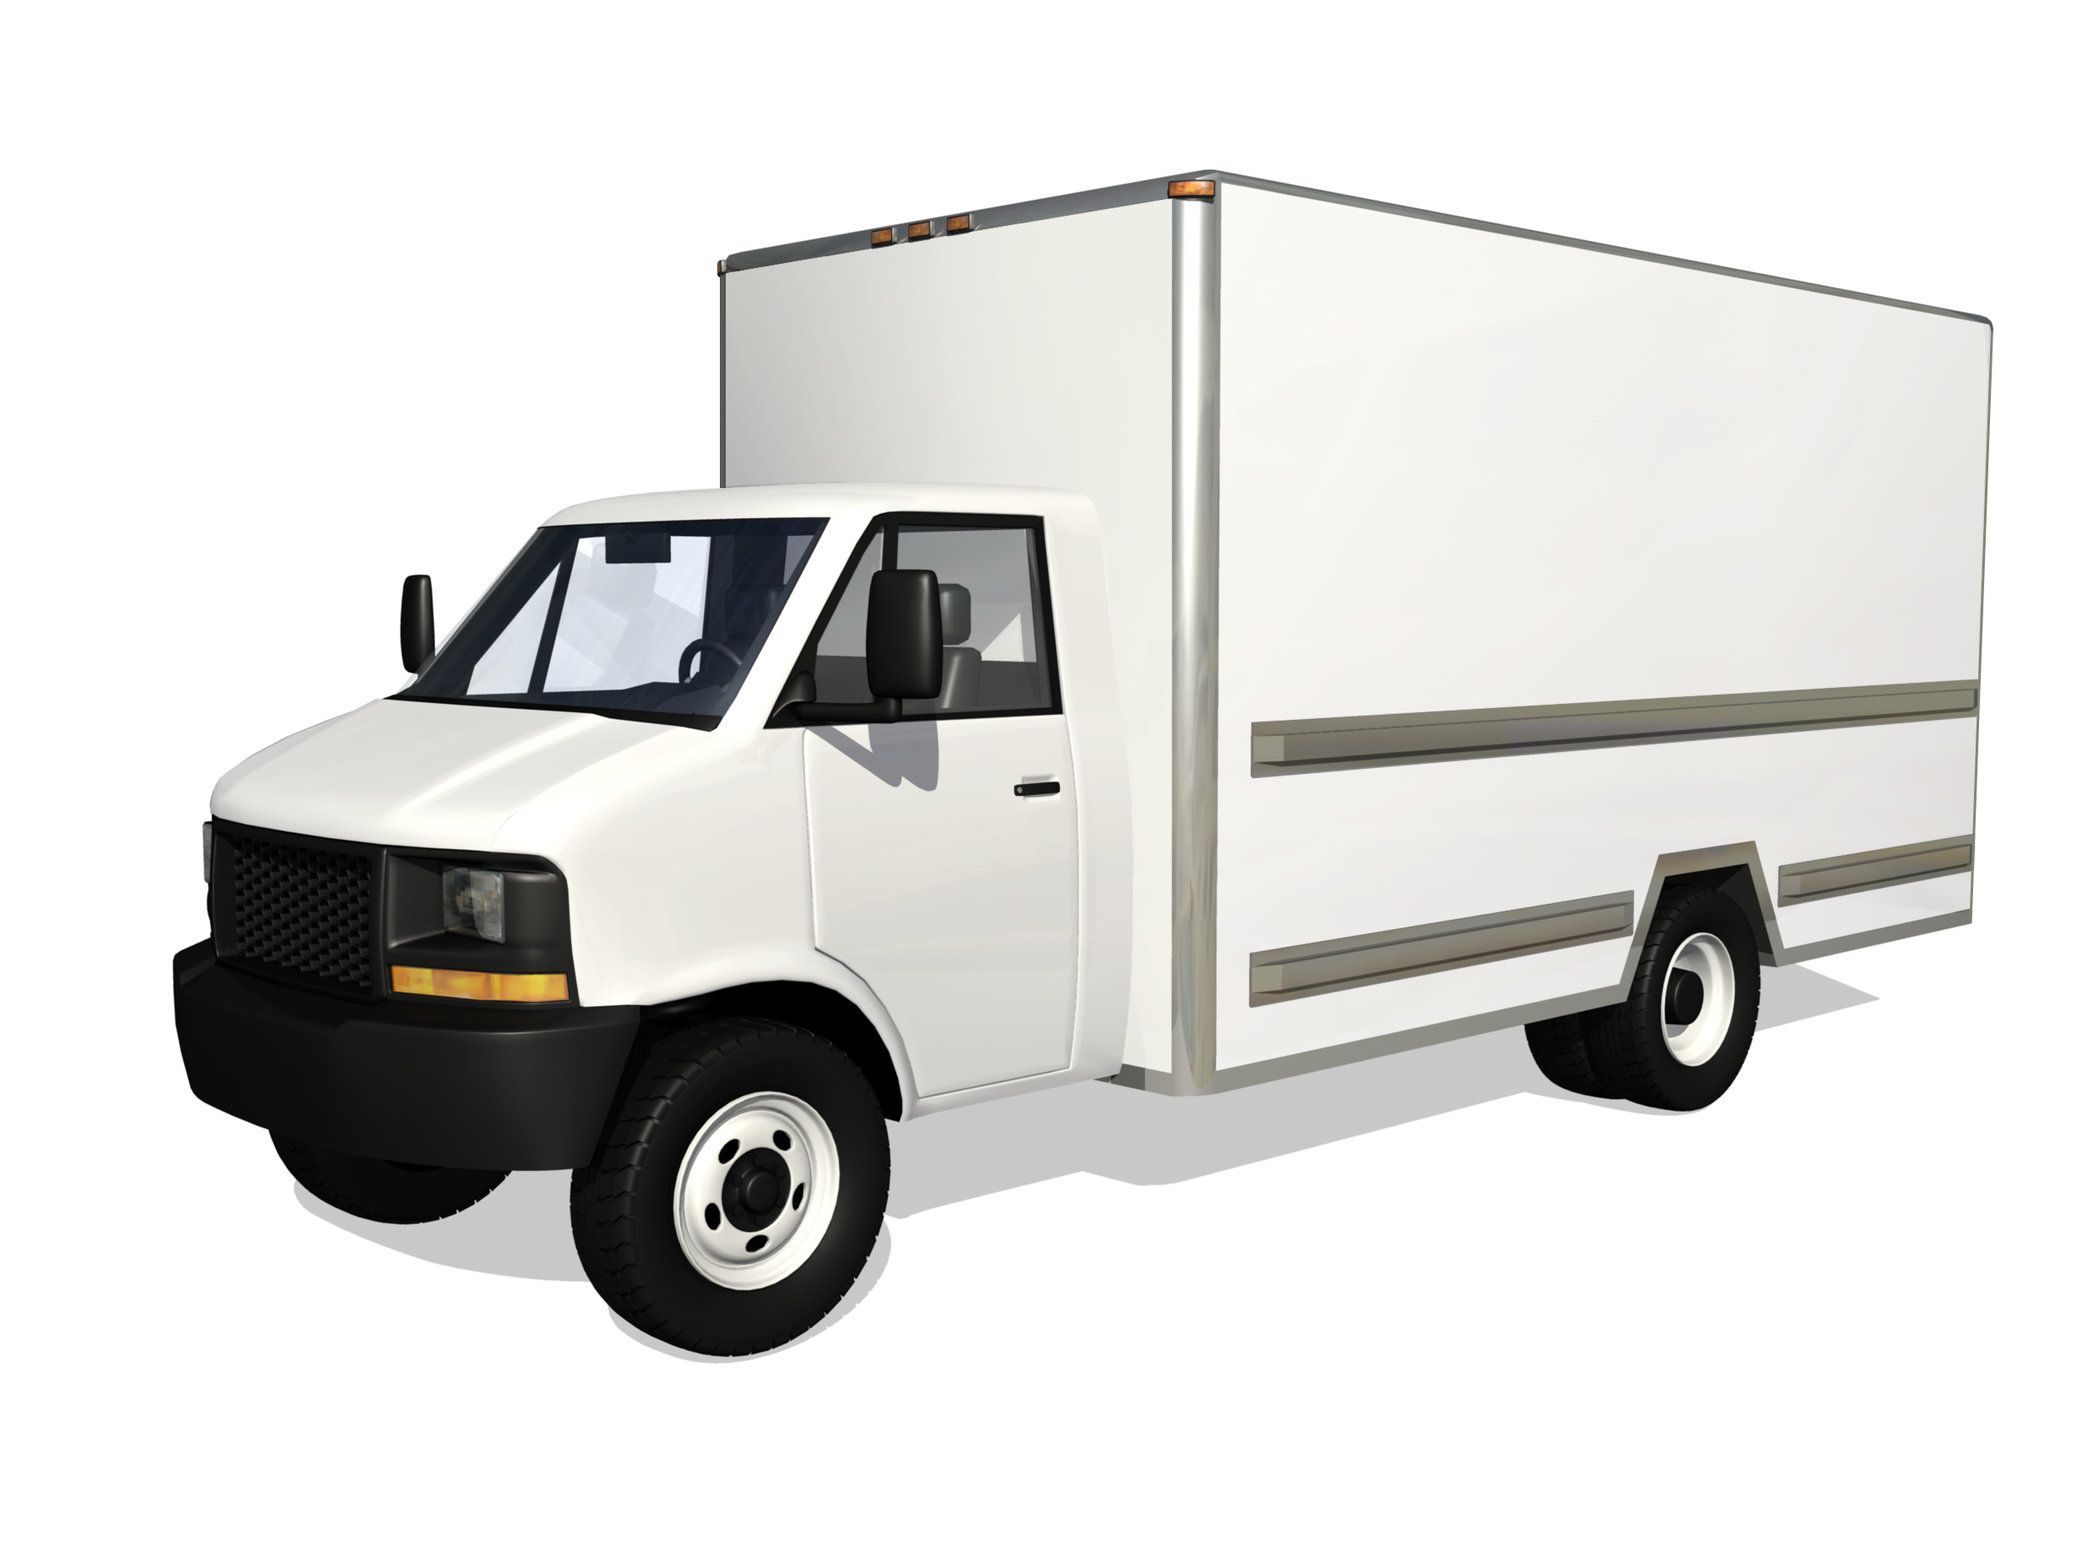 Used Ford E-Series Cargo Vans and for Sale - Penske Used Trucks